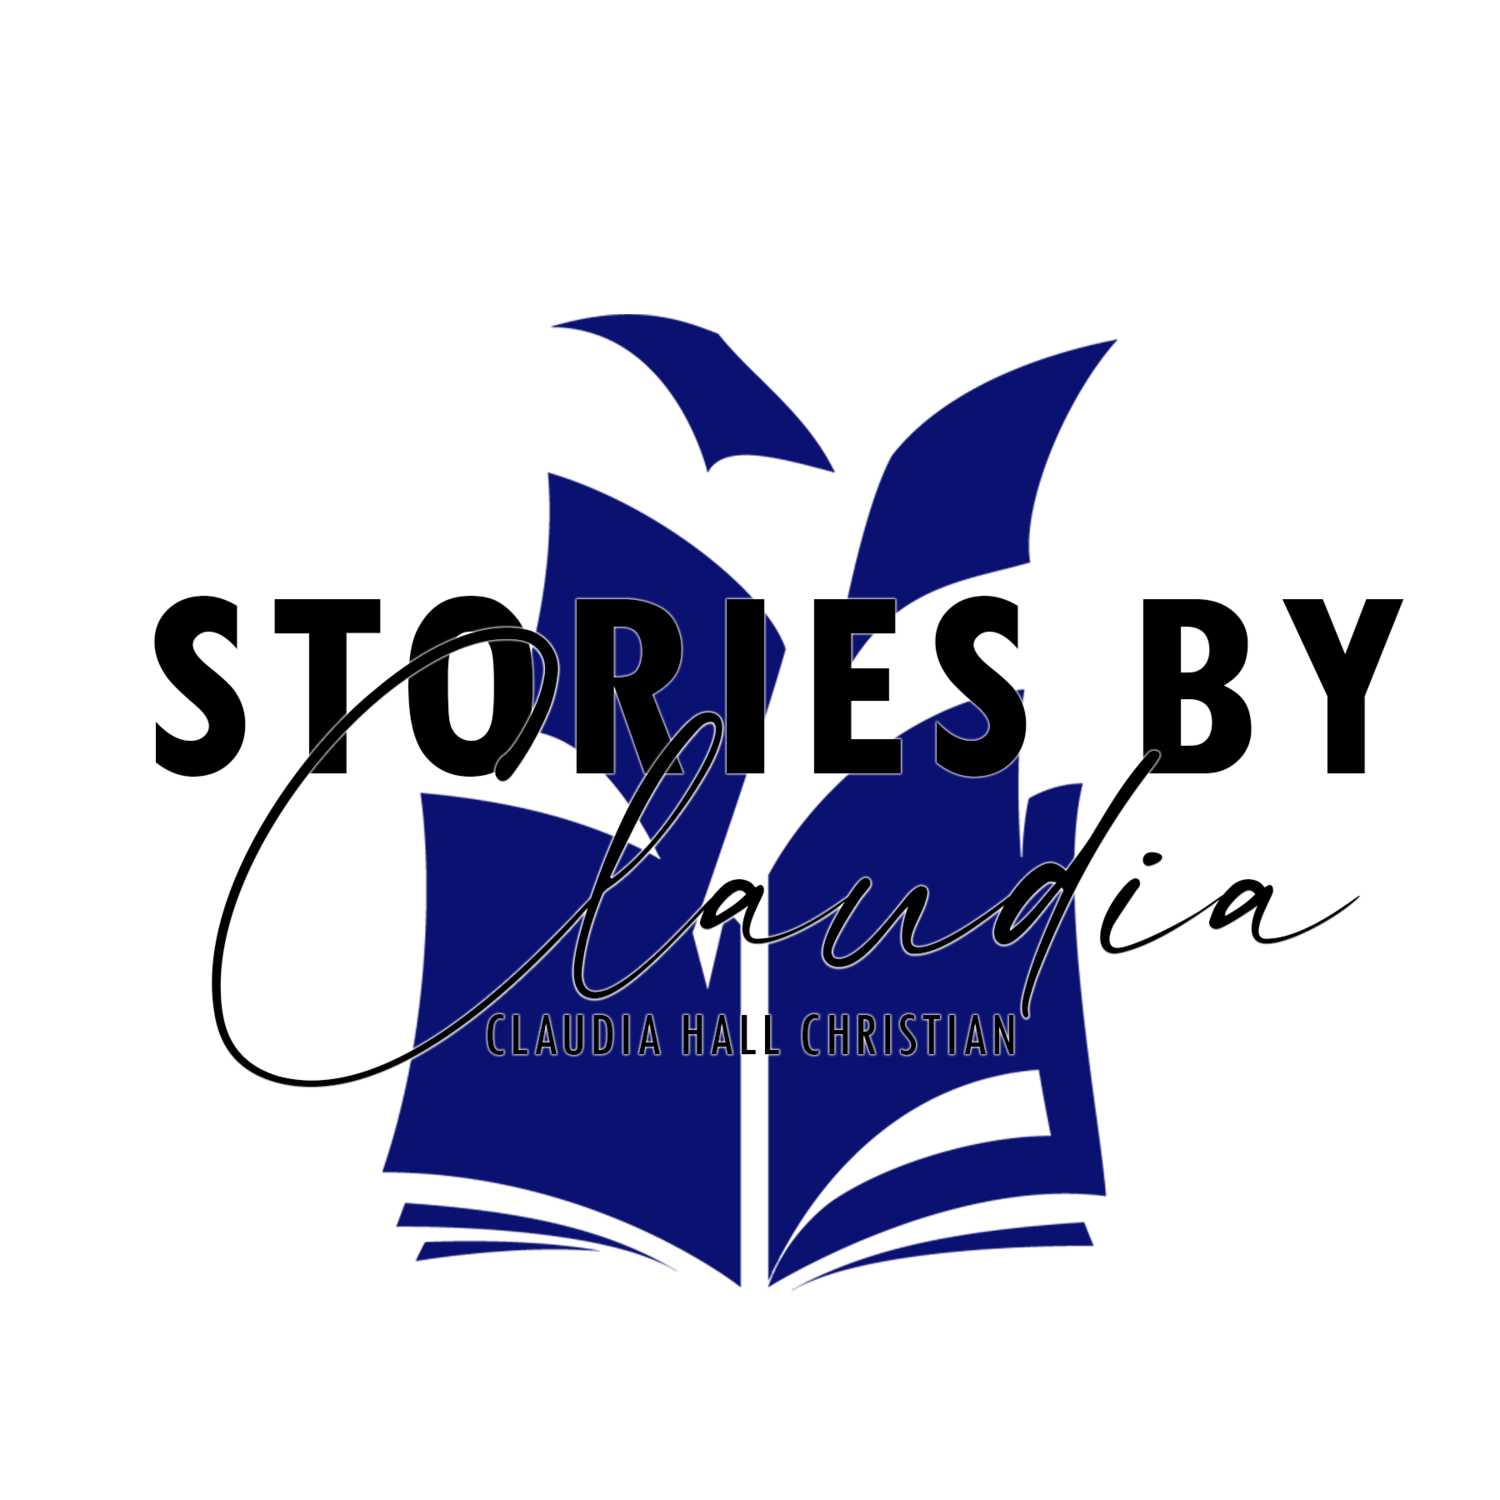 Stories by Claudia - Claudia Hall Christian writes great stories about good people caught in difficult times.